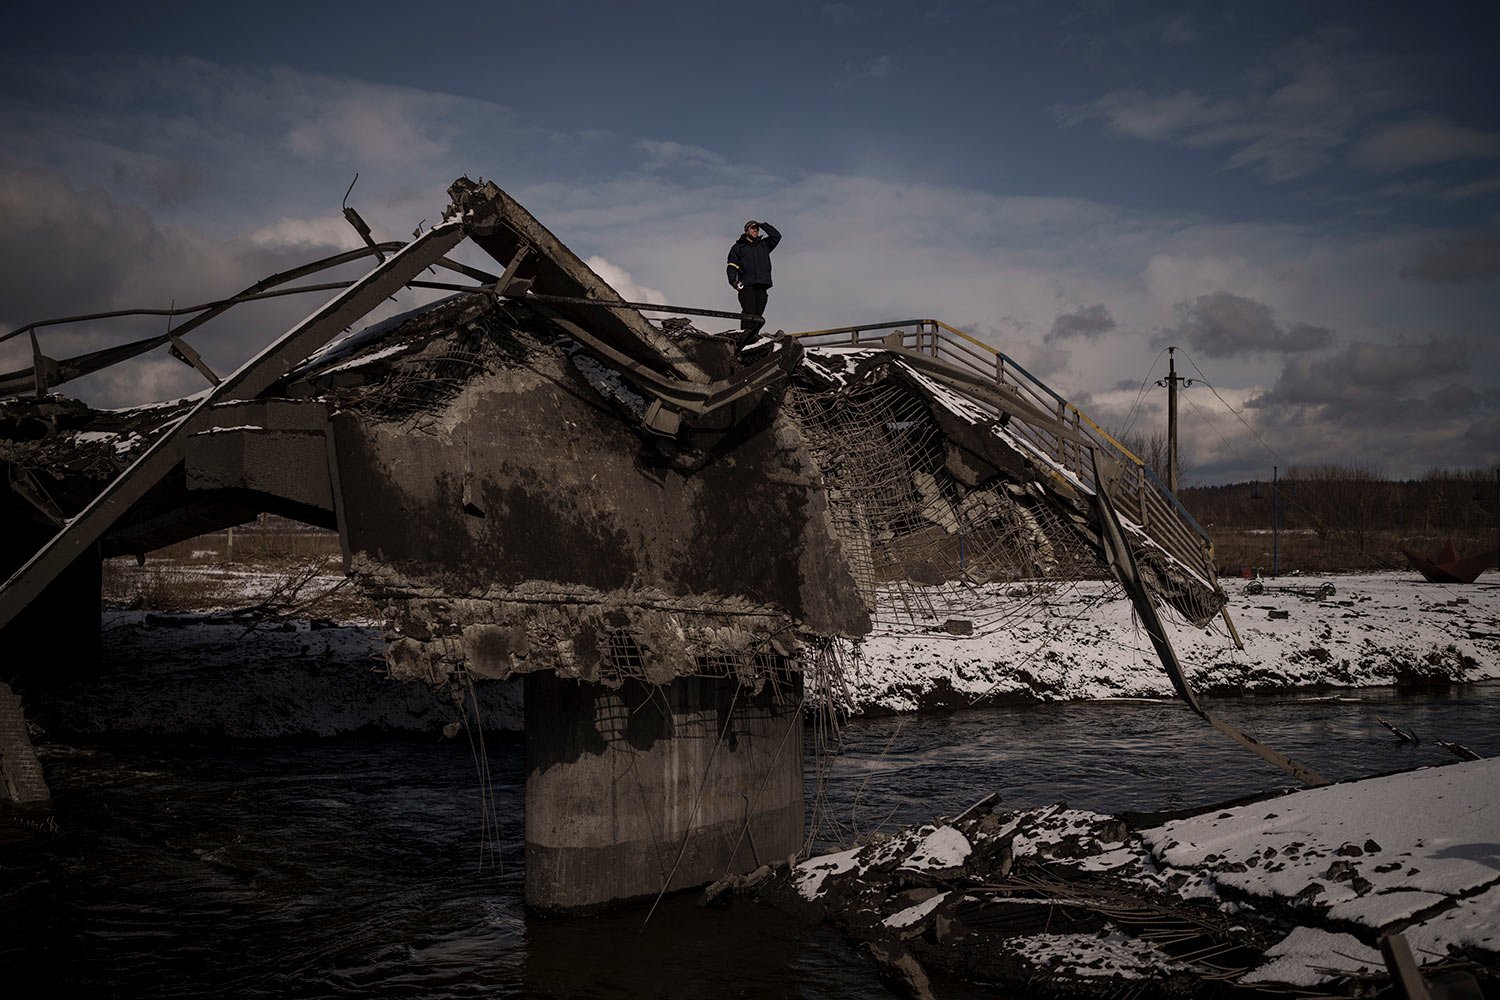  A man stands atop a destroyed bridge in Irpin, on the outskirts of Kyiv, Ukraine, Tuesday, March 8, 2022. (AP Photo/Felipe Dana)  